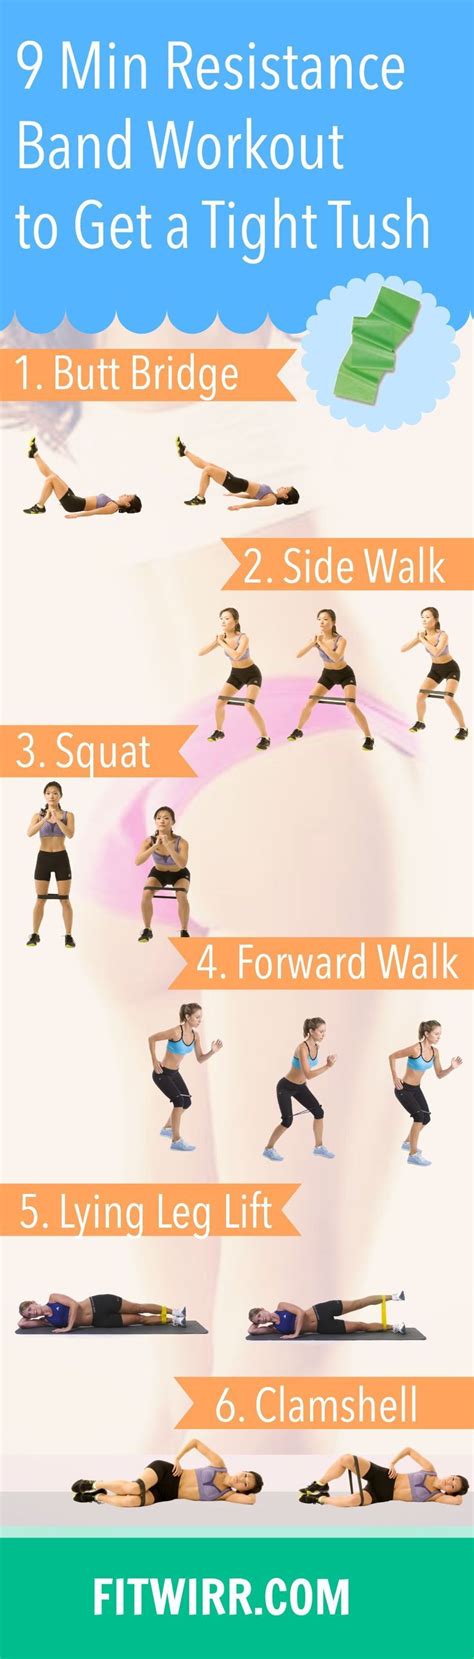 40 Resistance Band Exercises For A Full Body Workout Fitwirr Bikini